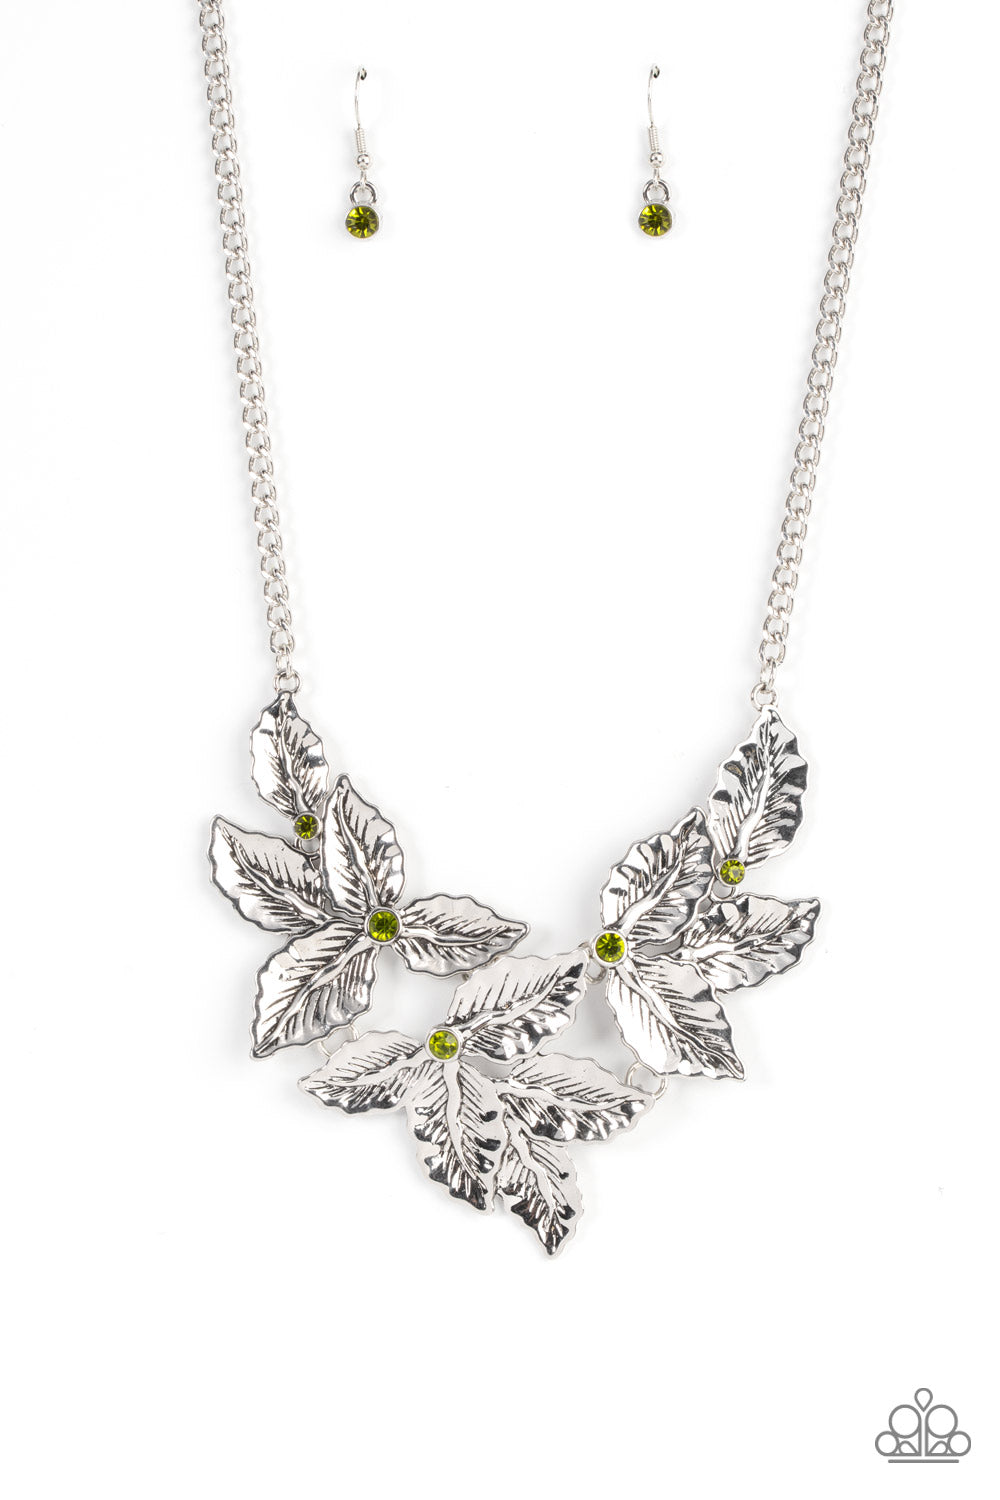 Paparazzi Holly Heiress - Green Necklace- Paparazzi Accessories Jewelry